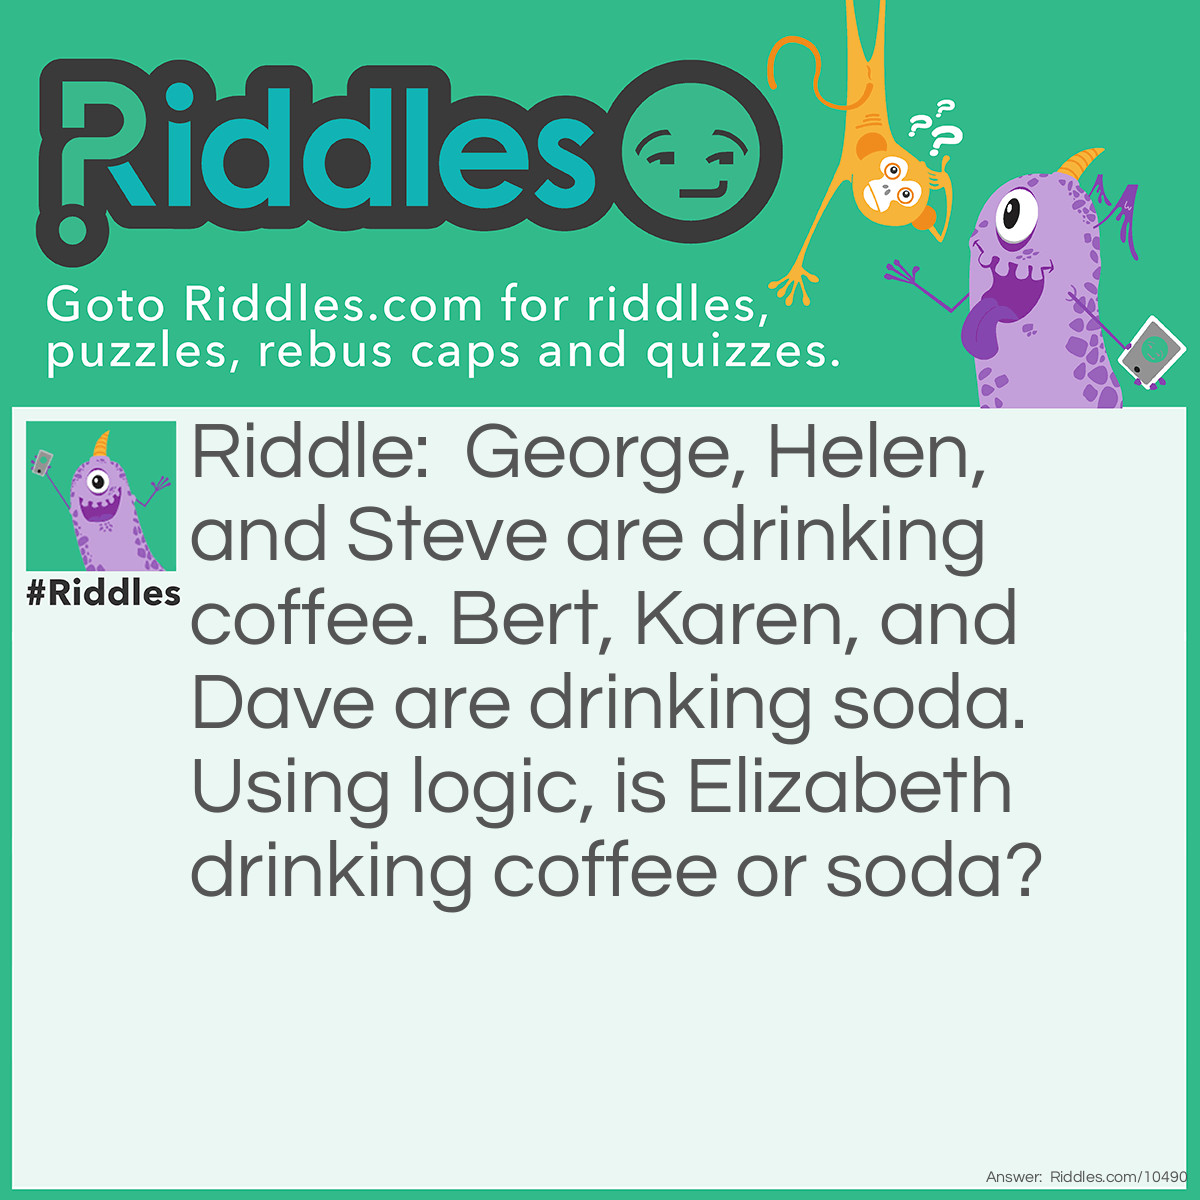 Riddle: George, Helen, and Steve are drinking coffee. Bert, Karen, and Dave are drinking soda. Using logic, is Elizabeth drinking coffee or soda? Answer: Elizabeth is drinking coffee. The letter E appears twice in her name, as it does in the names of the others that are drinking coffee.